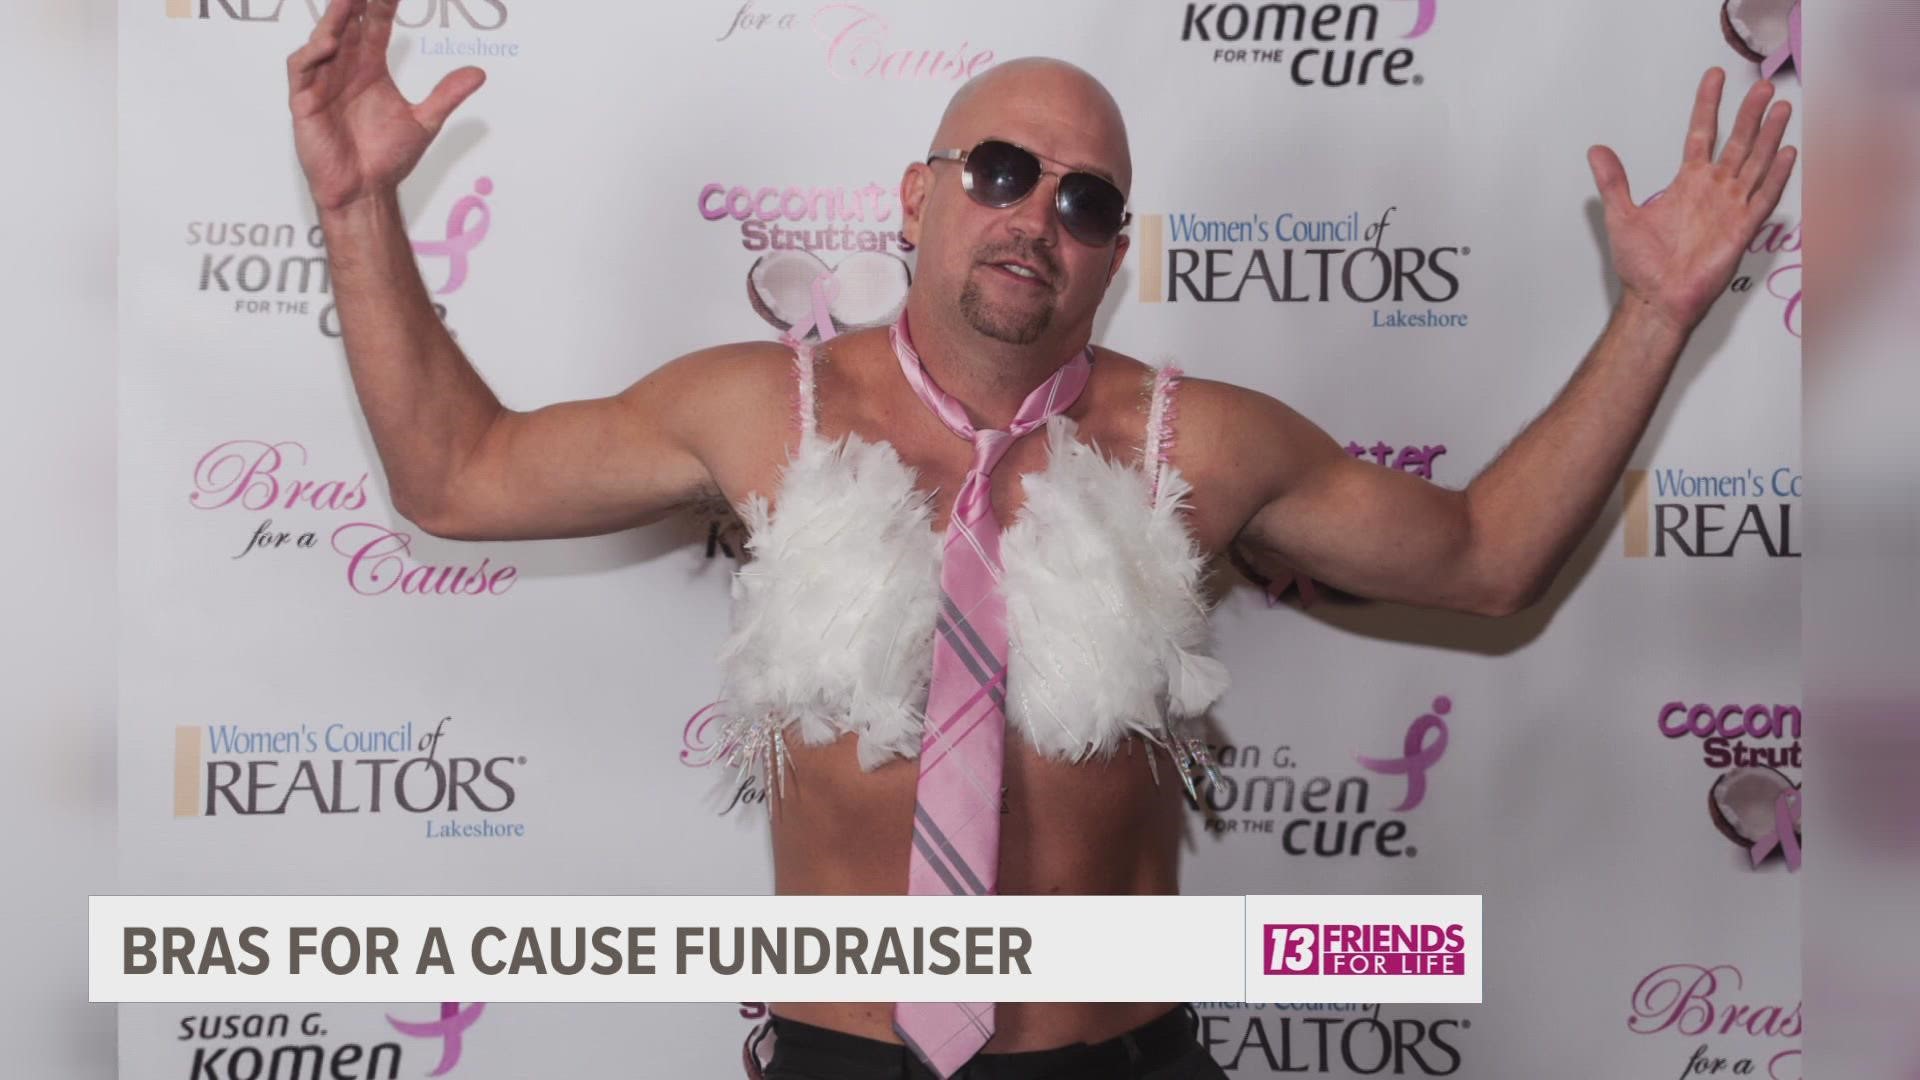 Bras for a Cause offers support for Breast Cancer research